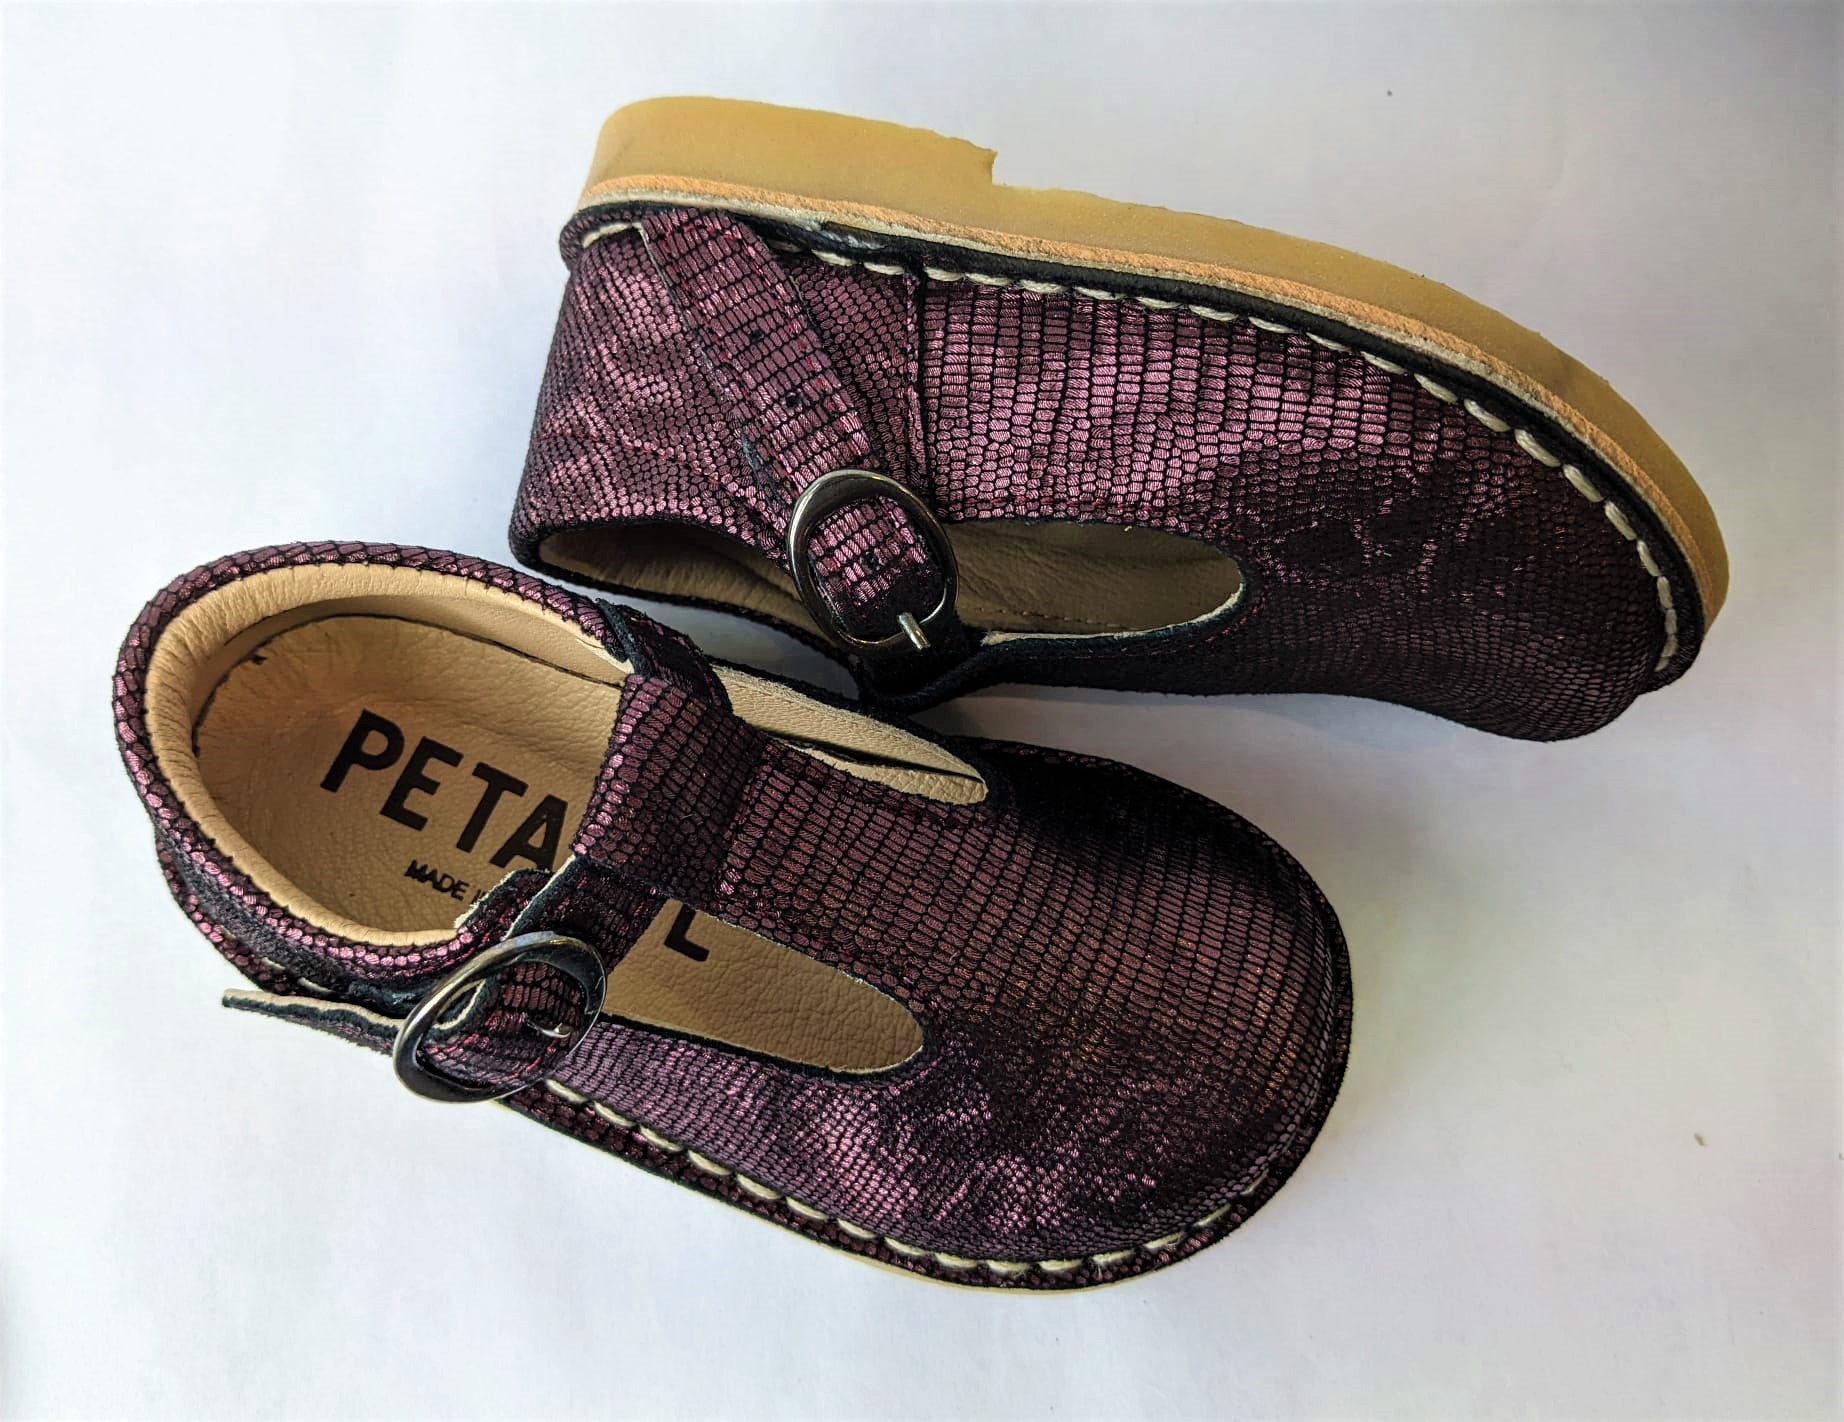 A girls T-Bar shoe by Petasil, style Crosspatch, in bordo with buckle fastening. Top view of a pair.